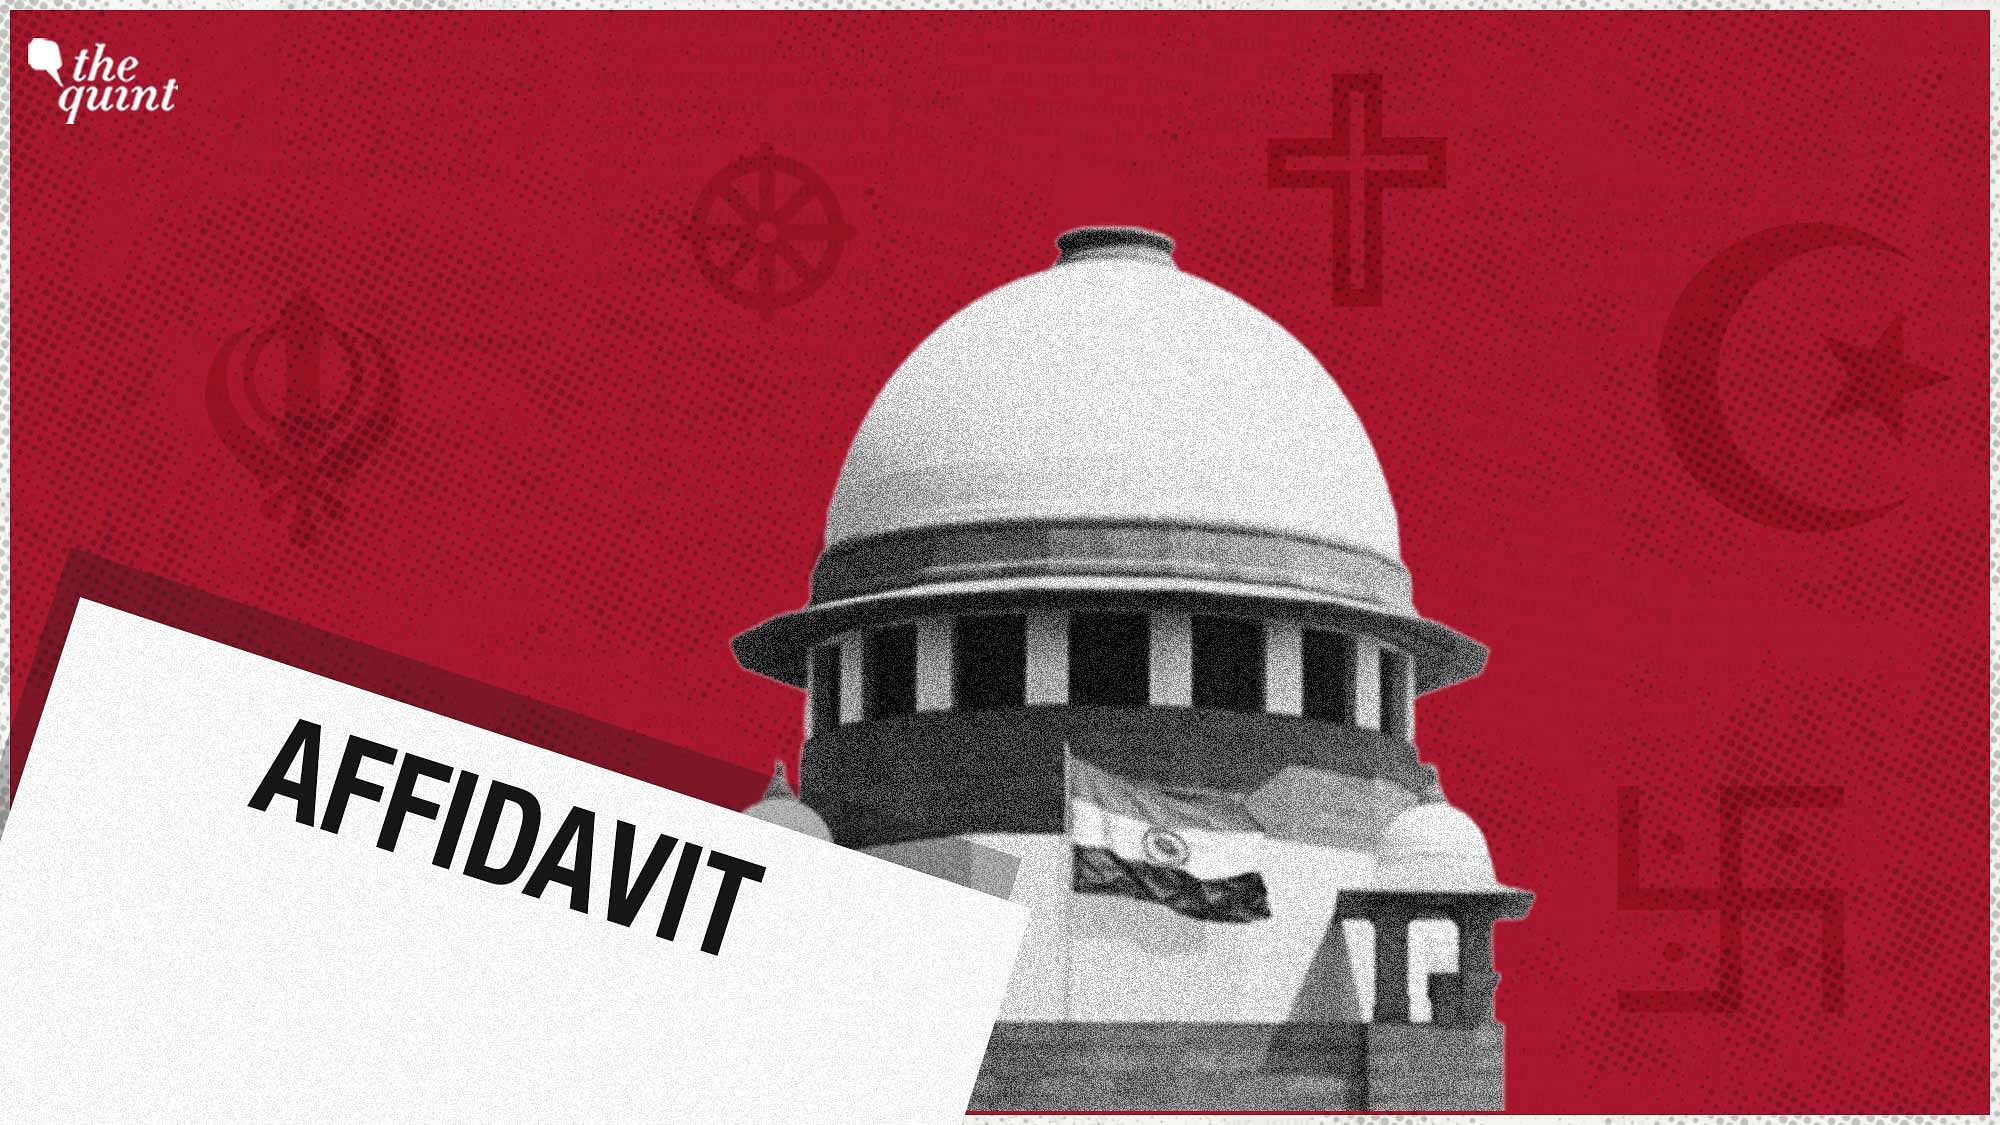 <div class="paragraphs"><p>In an affidavit to the Supreme Court, the Central Government has stated that the Right to Religion doesn't include the Right To Convert. But is this view in step with India's Constitution?</p></div>